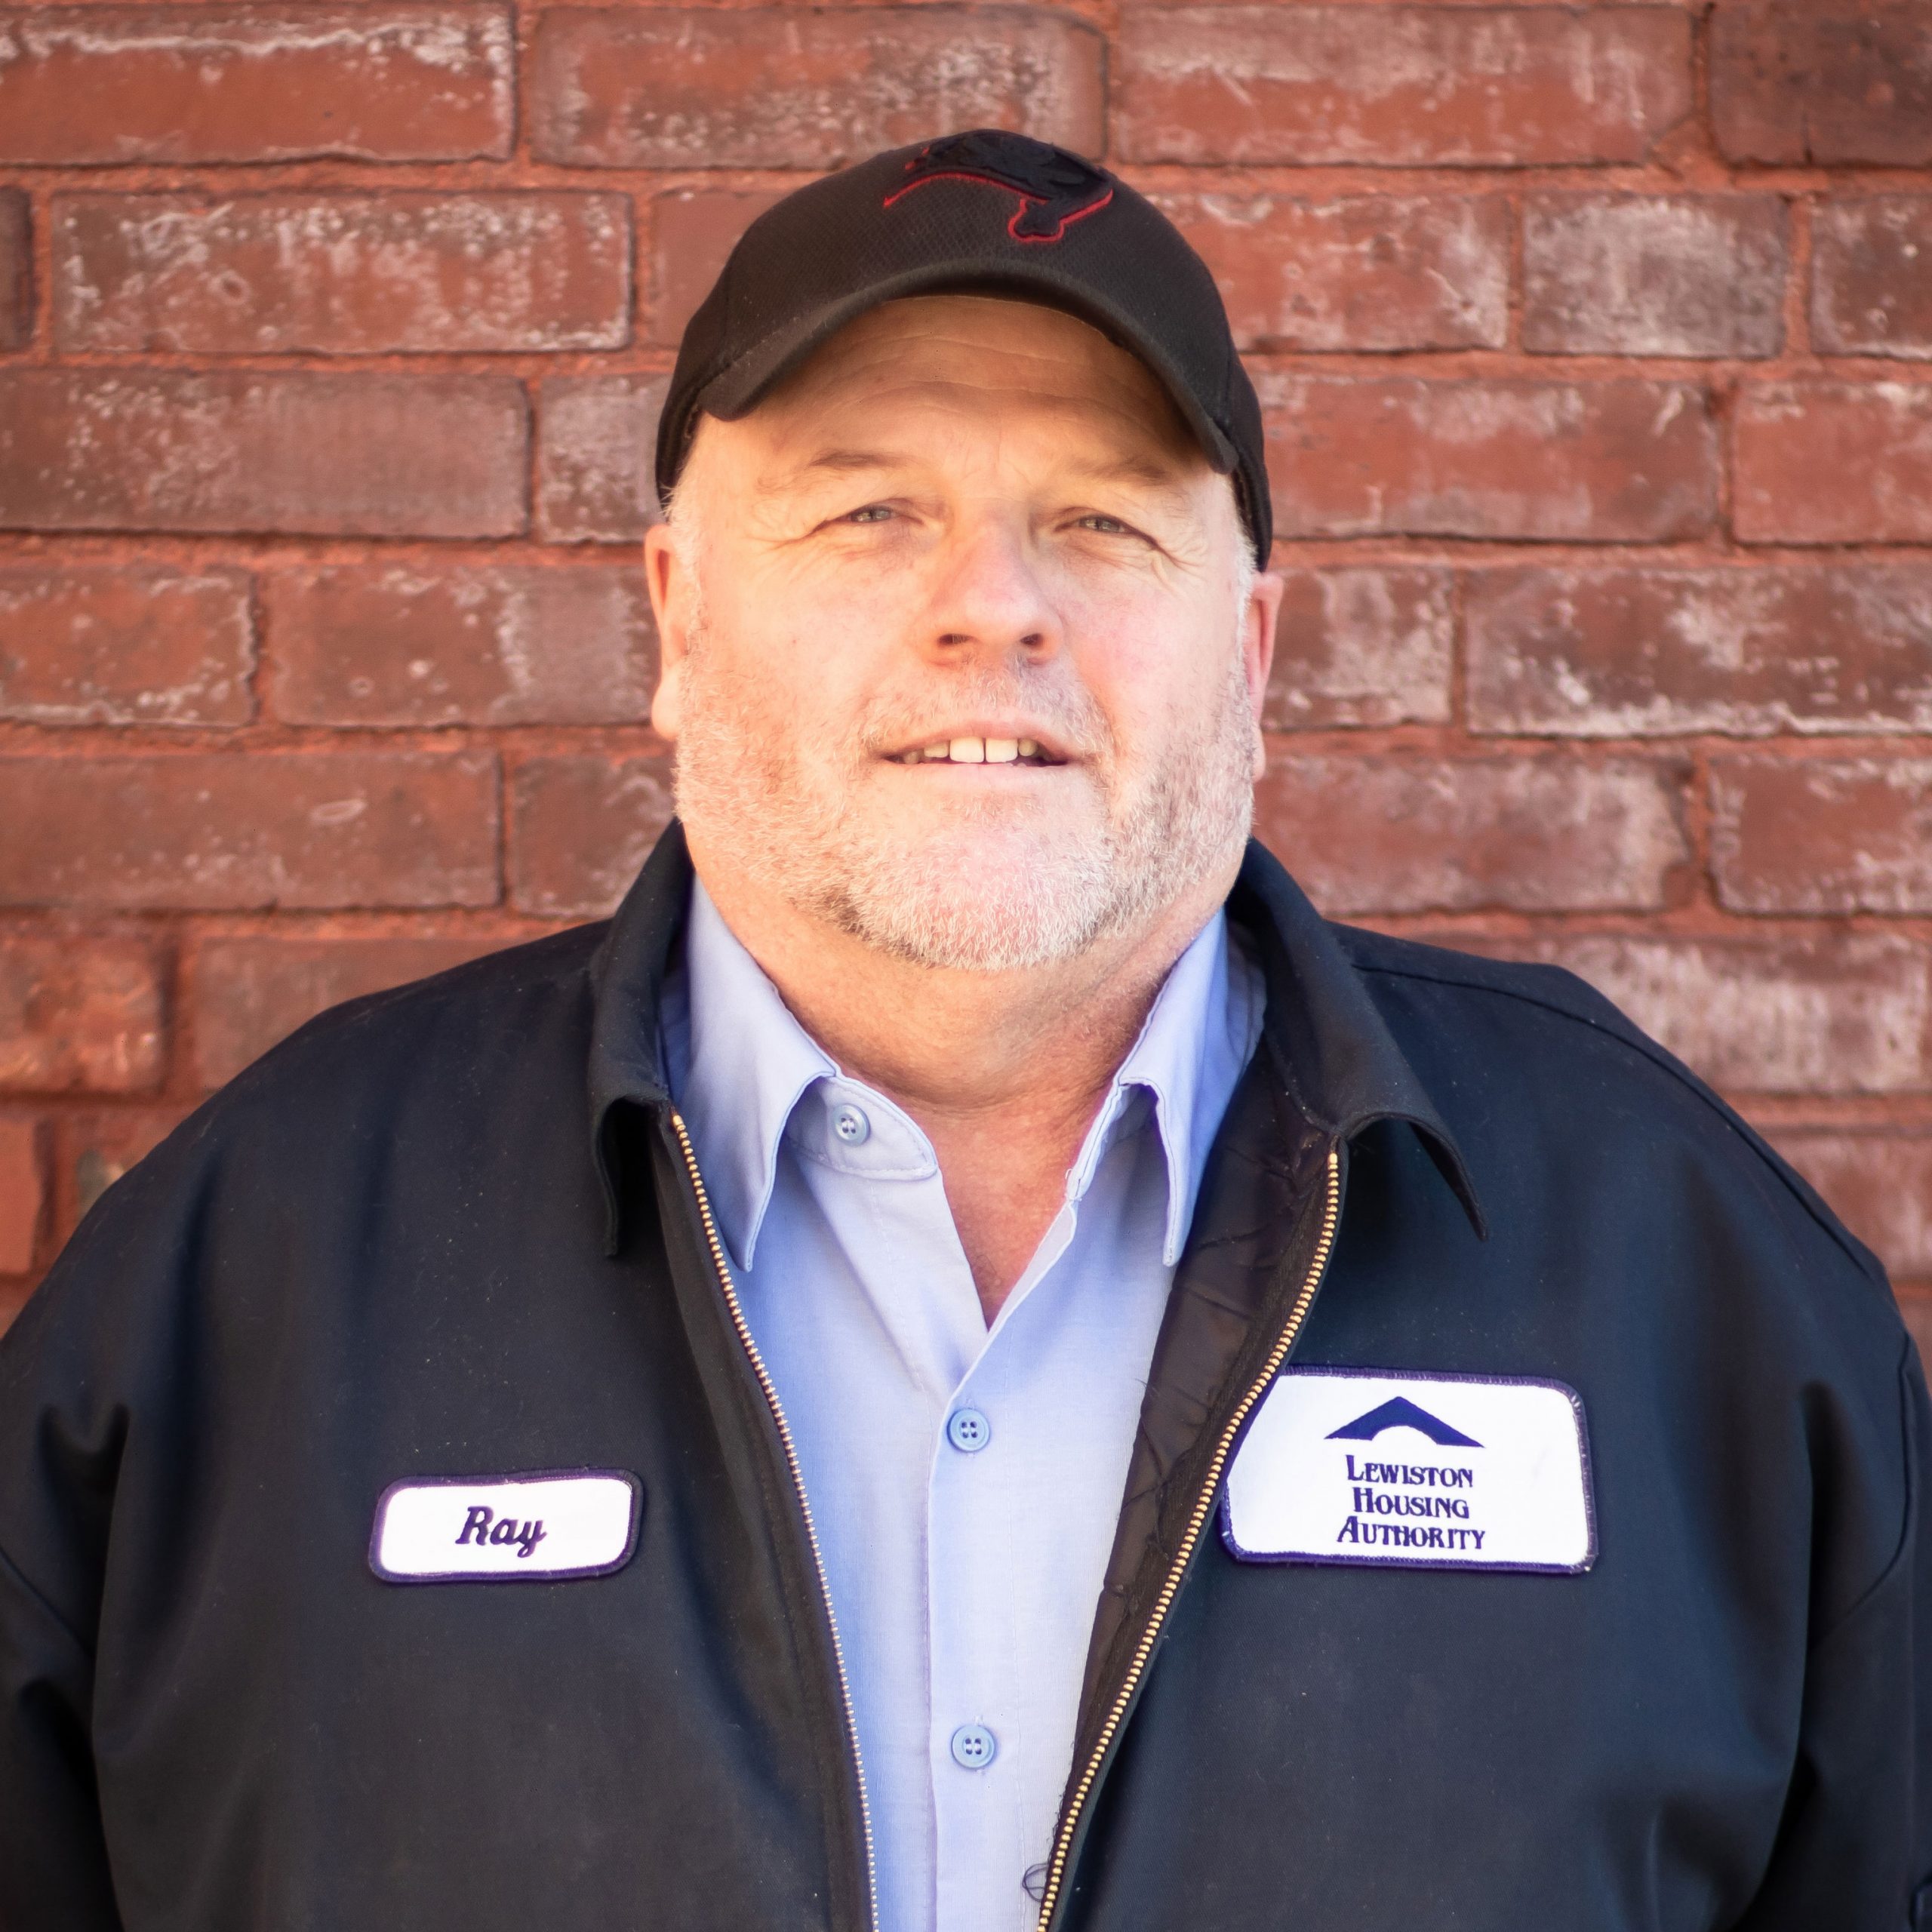 A photo of Ray Berube, Maintenance Manager at Lewiston Housing